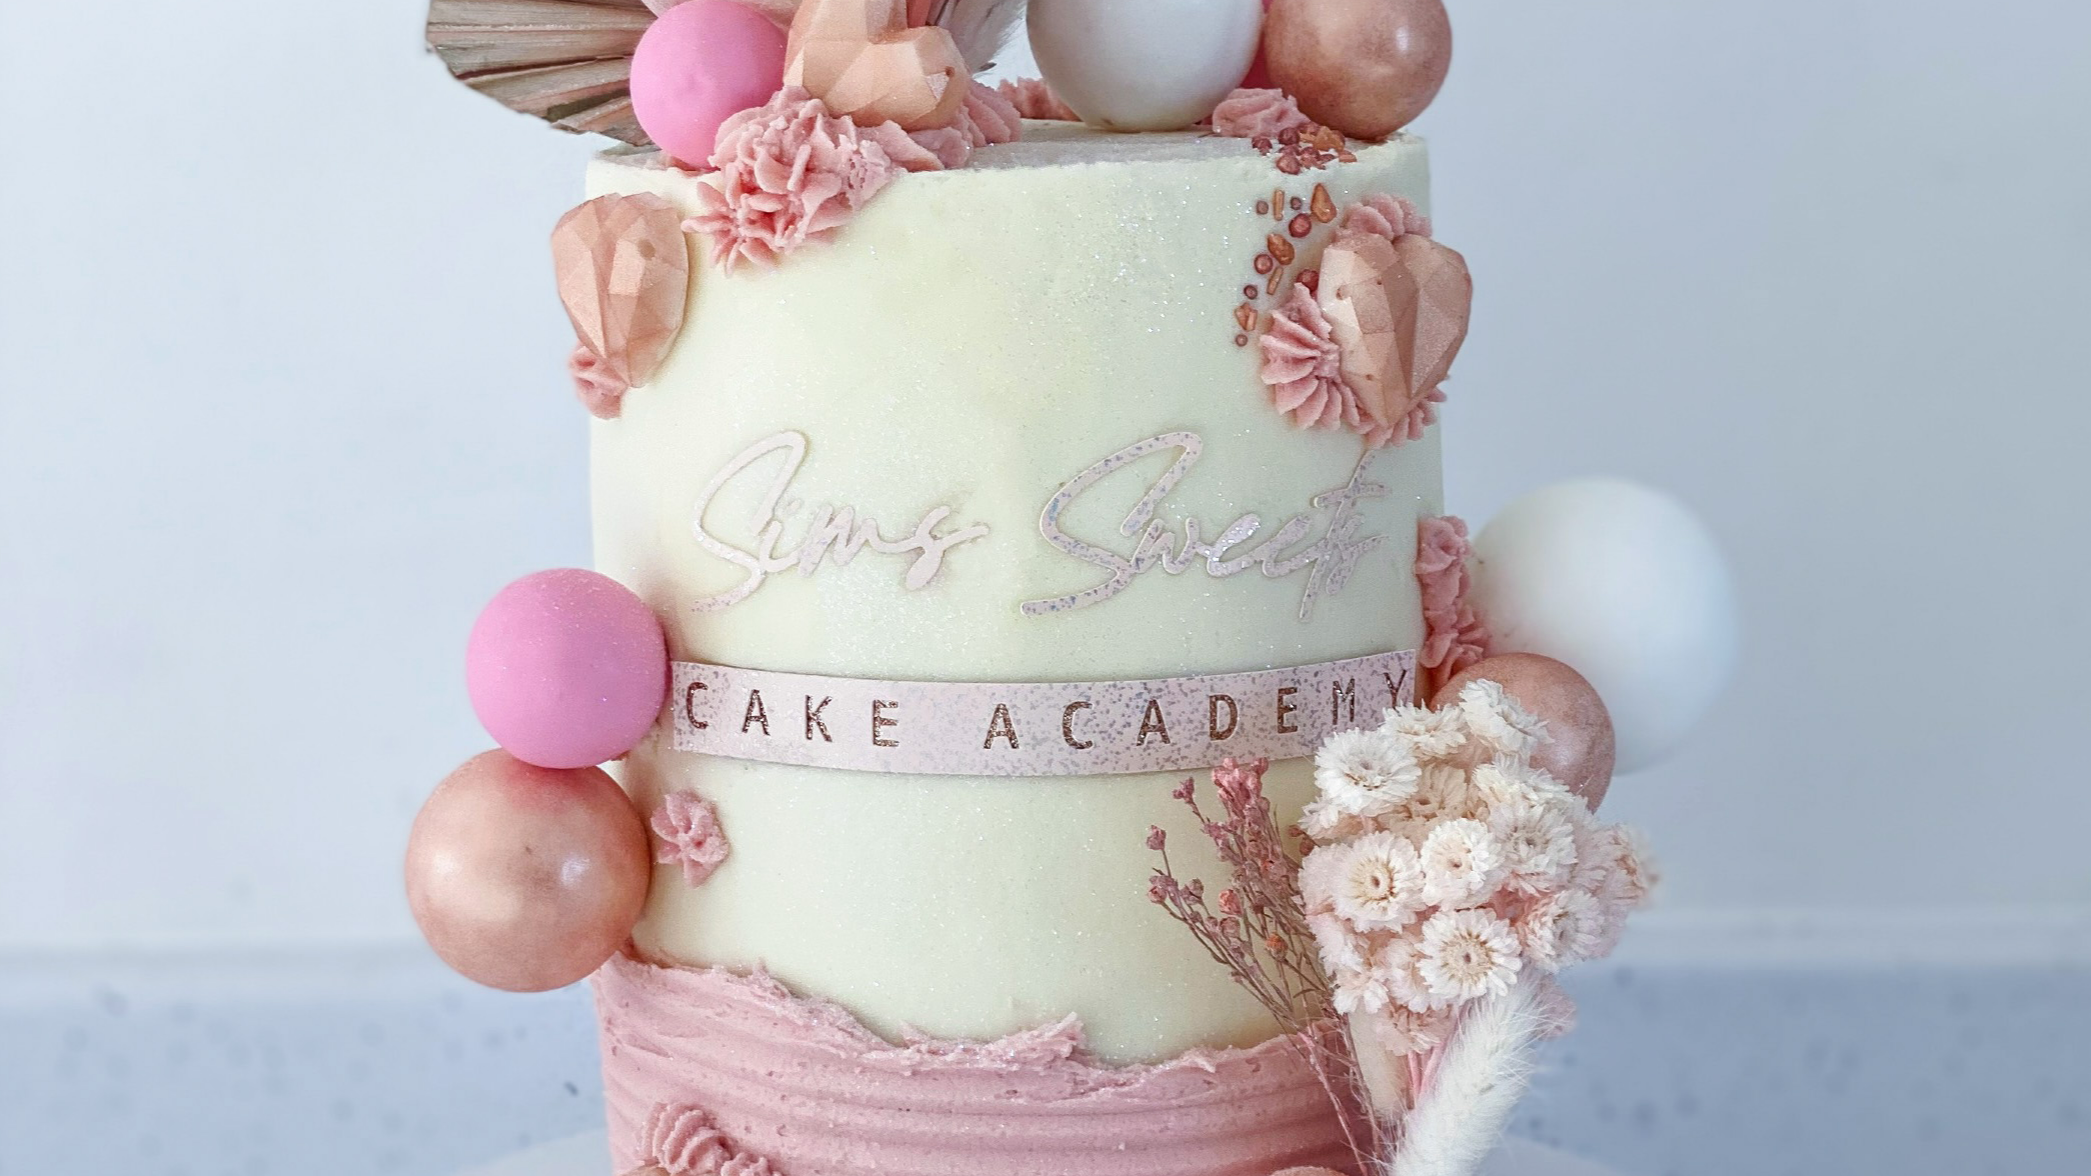 The Creative Cake Academy - Cake Decorating Courses and Design - Home